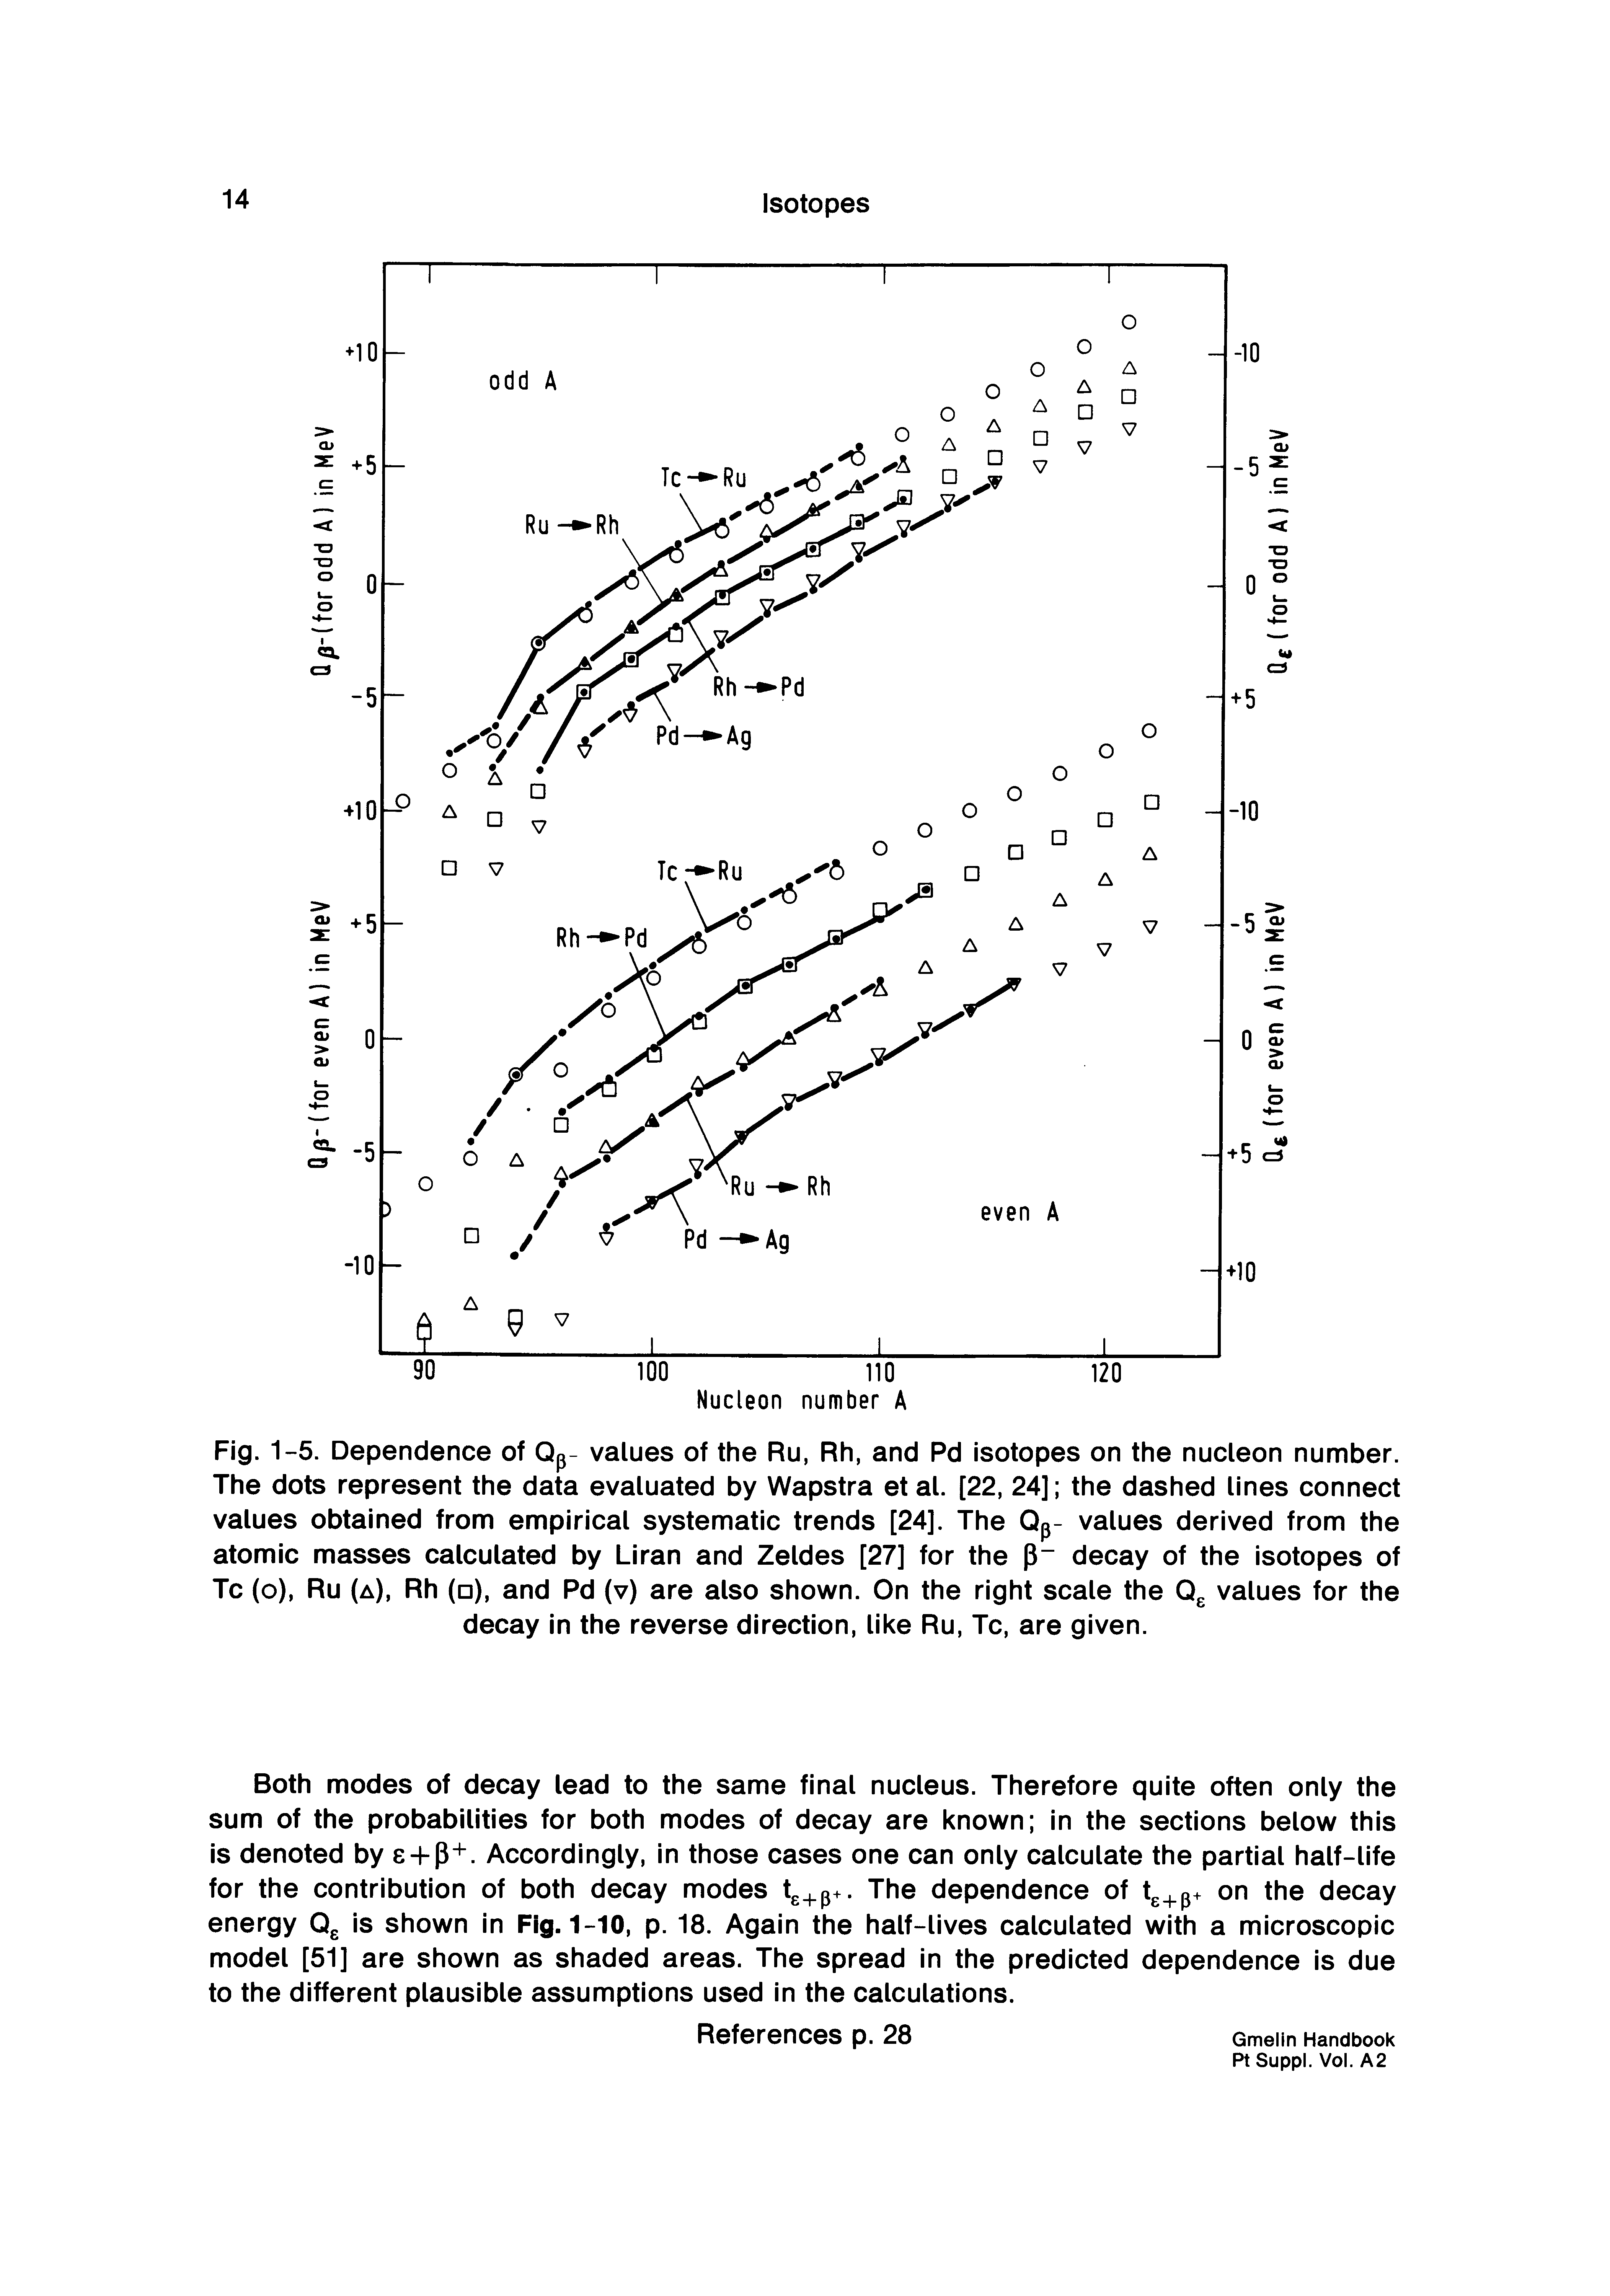 Fig. 1-5. Dependence of Qp- values of the Ru, Rh, and Pd isotopes on the nucleon number. The dots represent the data evaluated by Wapstra et al. [22, 24] the dashed lines connect values obtained from empirical systematic trends [24]. The Qp- values derived from the atomic masses calculated by Liran and Zeldes [27] for the decay of the isotopes of Tc (o), Ru (a), Rh ( ), and Pd (v) are also shown. On the right scale the Qg values for the decay in the reverse direction, like Ru, Tc, are given.